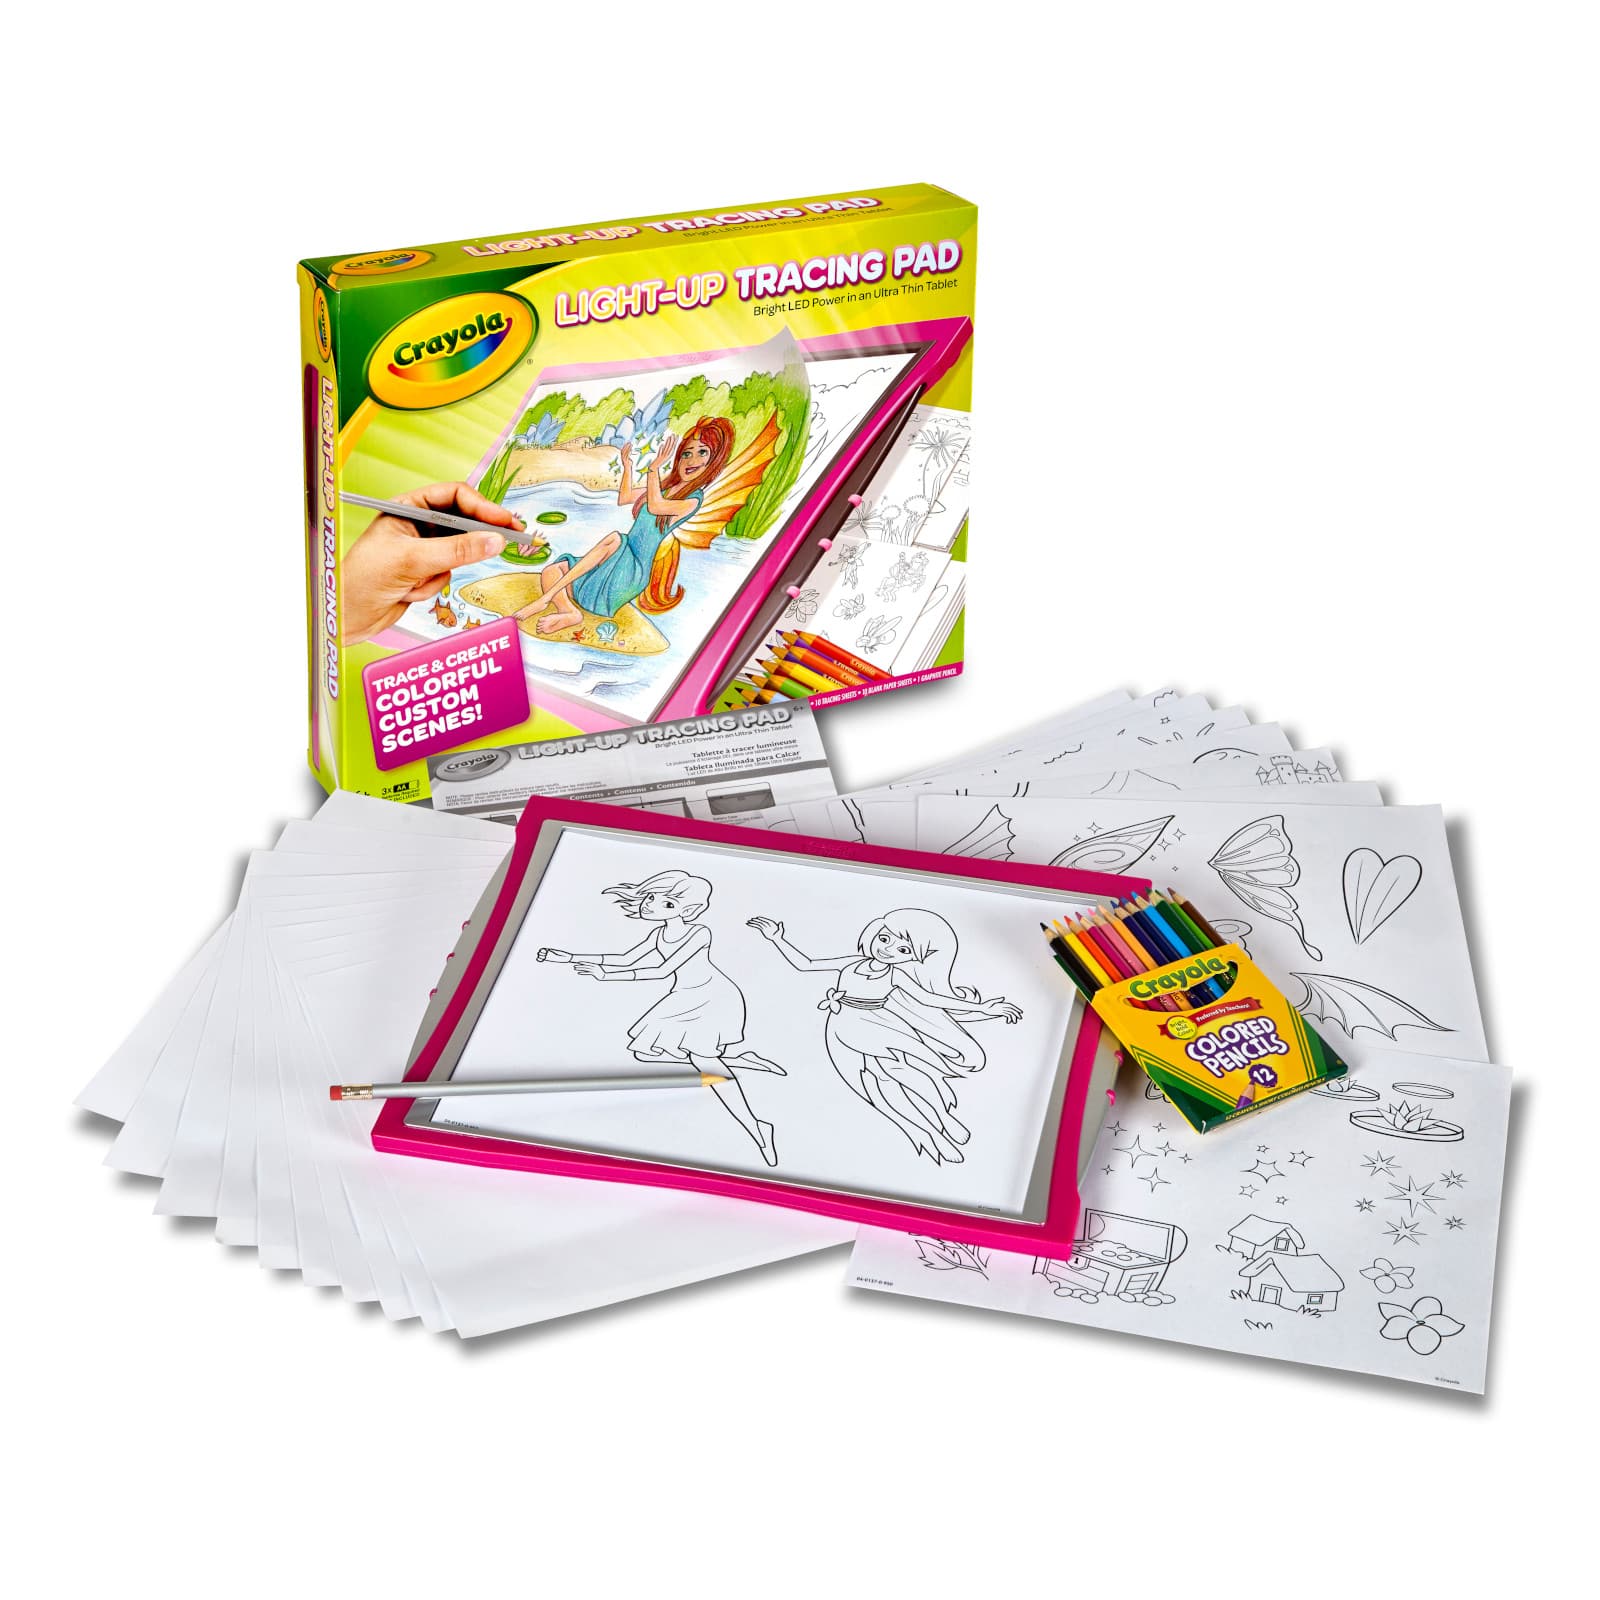 Crayola Light Up Tracing Pad - Pink, Drawing Pads for Kids, Kids Toys,  Light Box, Birthday Gifts for Girls & Boys, Ages 6+ [ Exclusive] :  Toys & Games 